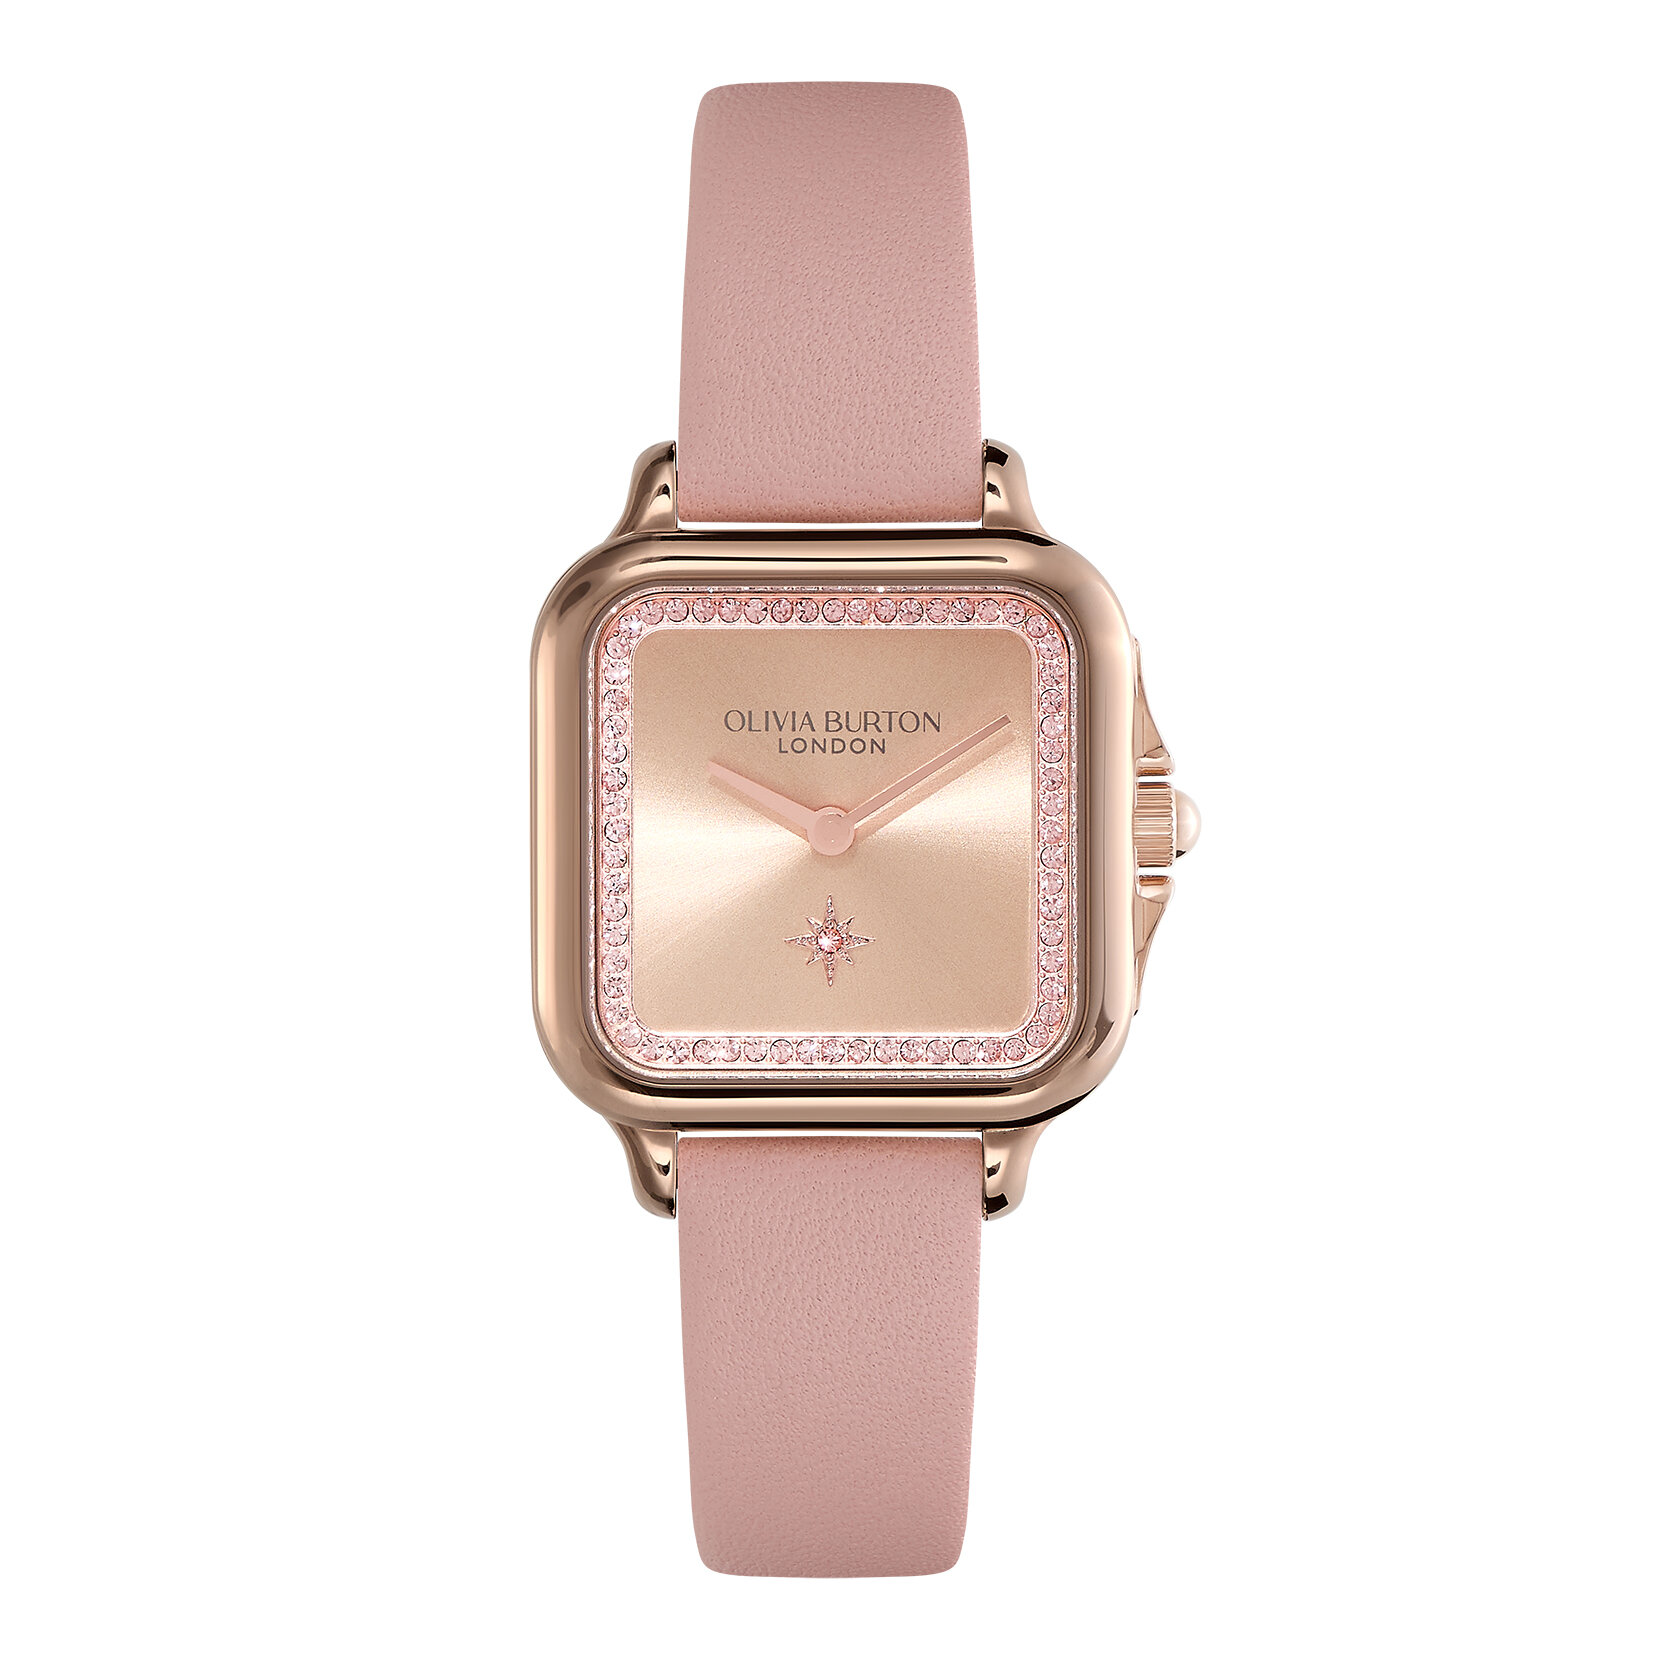 28mm Grosvenor Rose Gold & Mellow Rose Leather Strap Watch